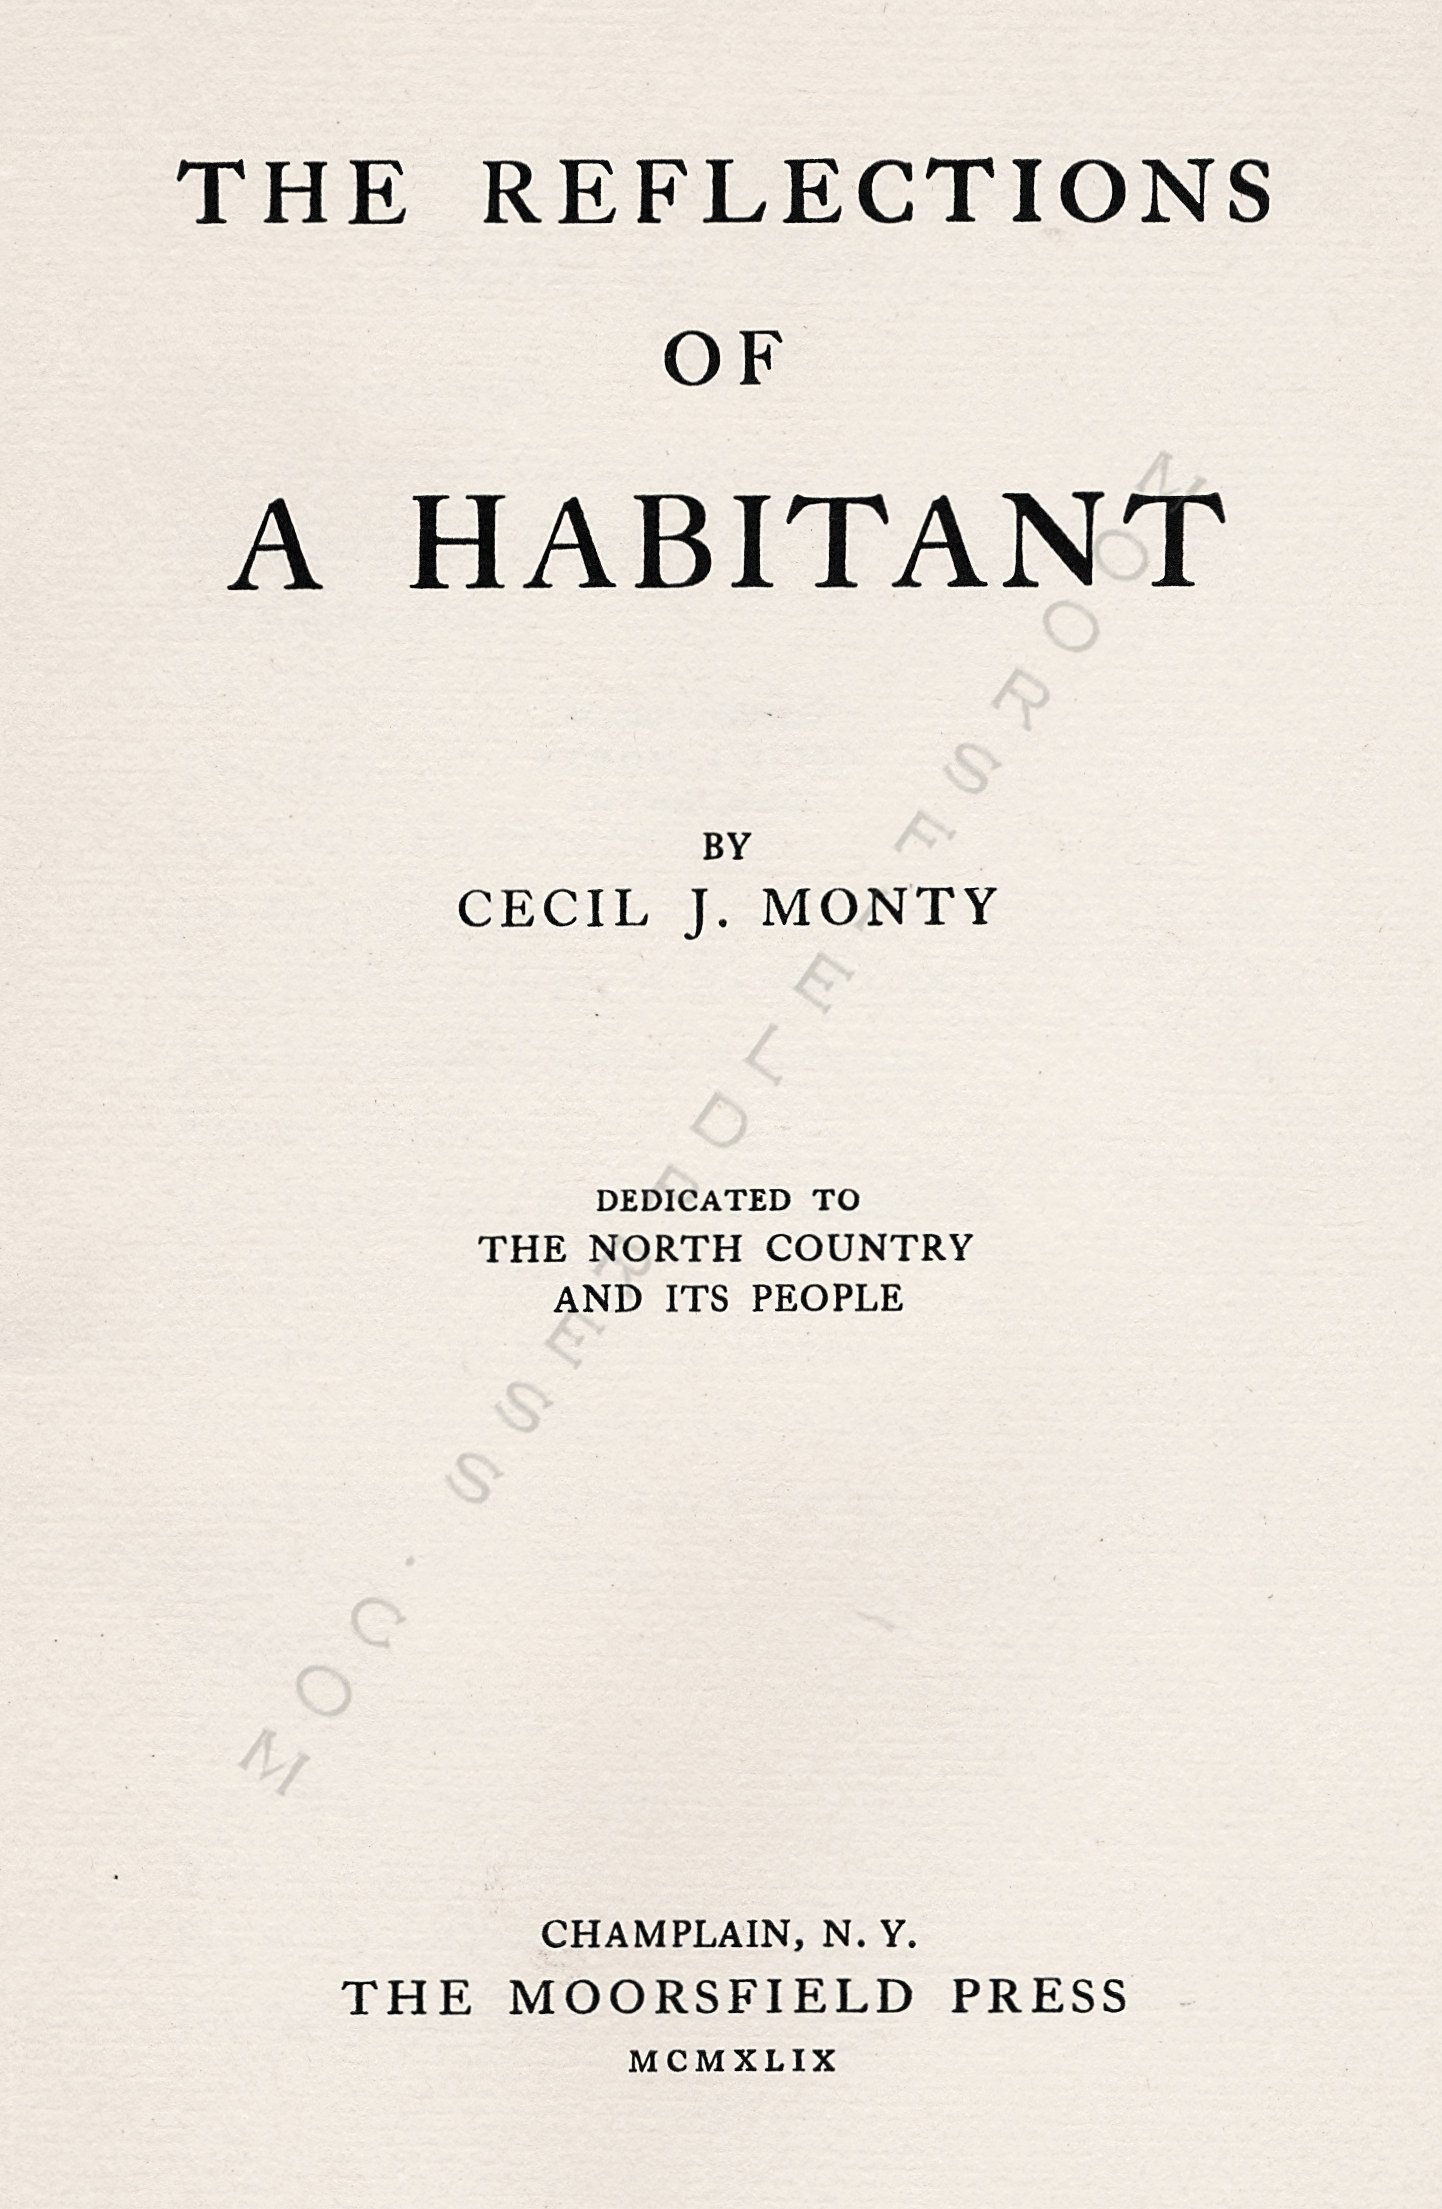 THE
                      REFLECTIONS OF A HABITANT BY CECIL J MONTY 1949